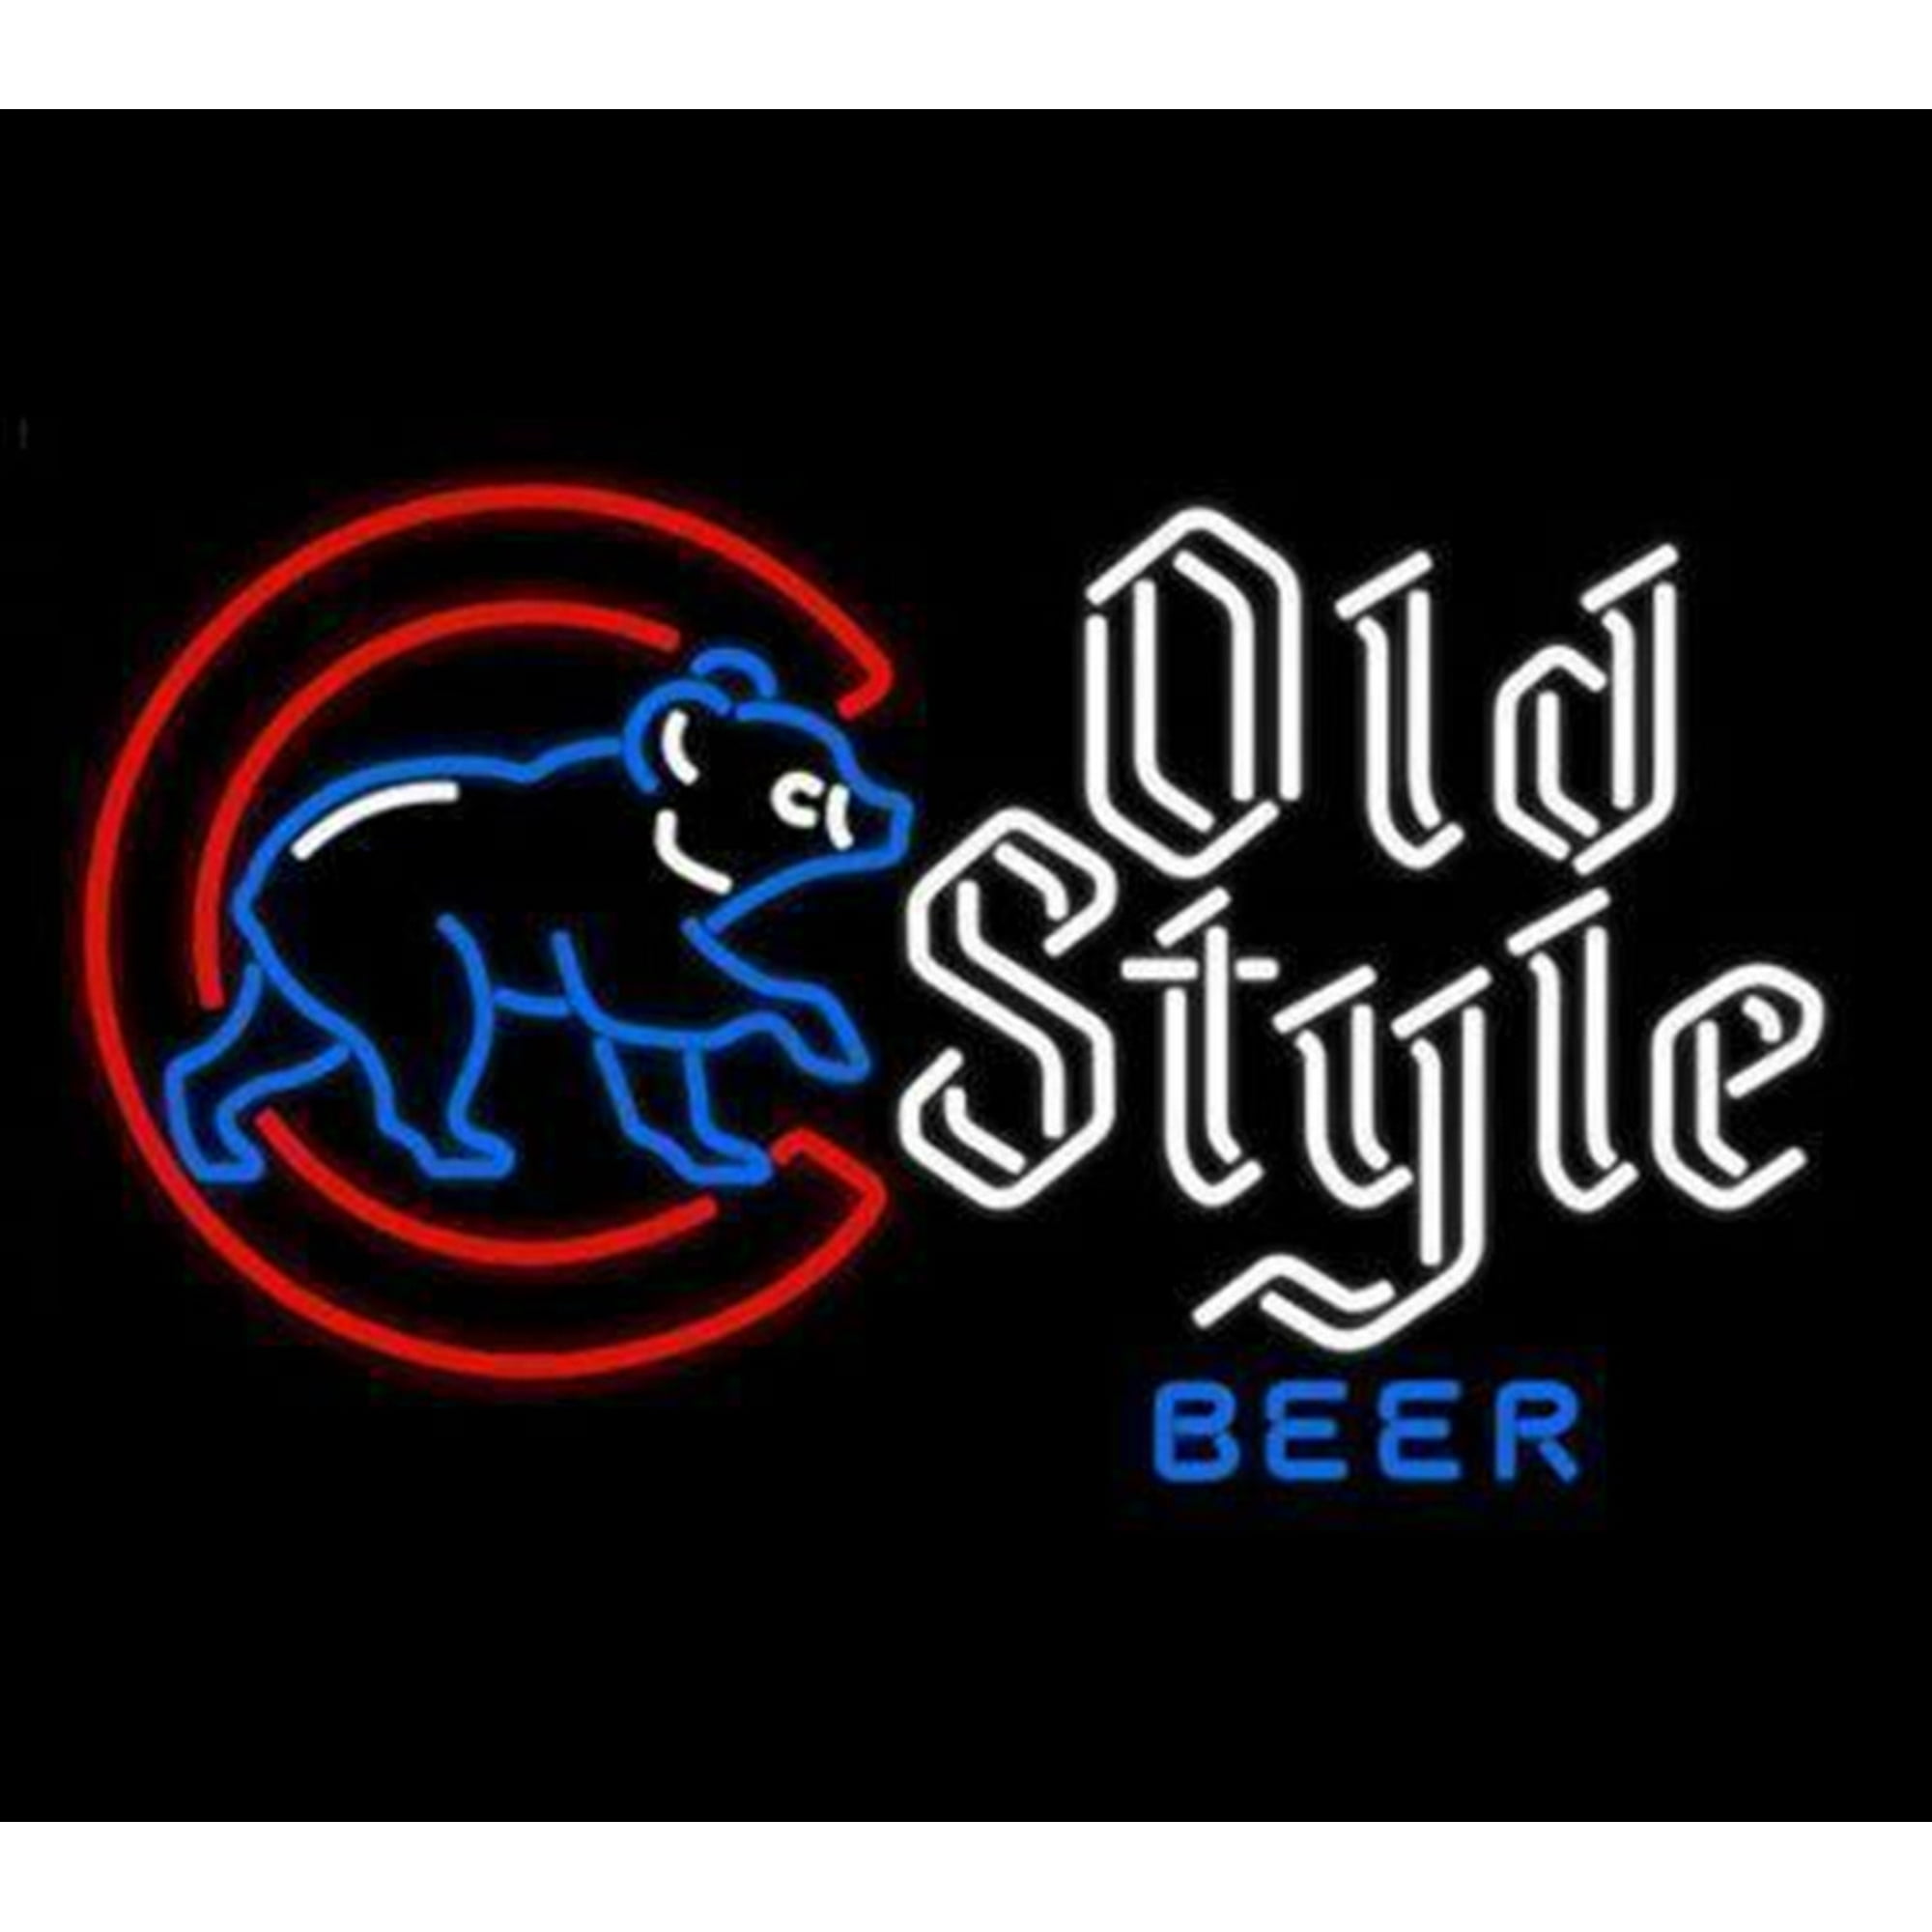 Queen Sense 20 inchx16 inch for Chicagos Sports Team Cubs Old Style Beer Neon Sign Man Cave Handmade Neon Light 120osbccwb